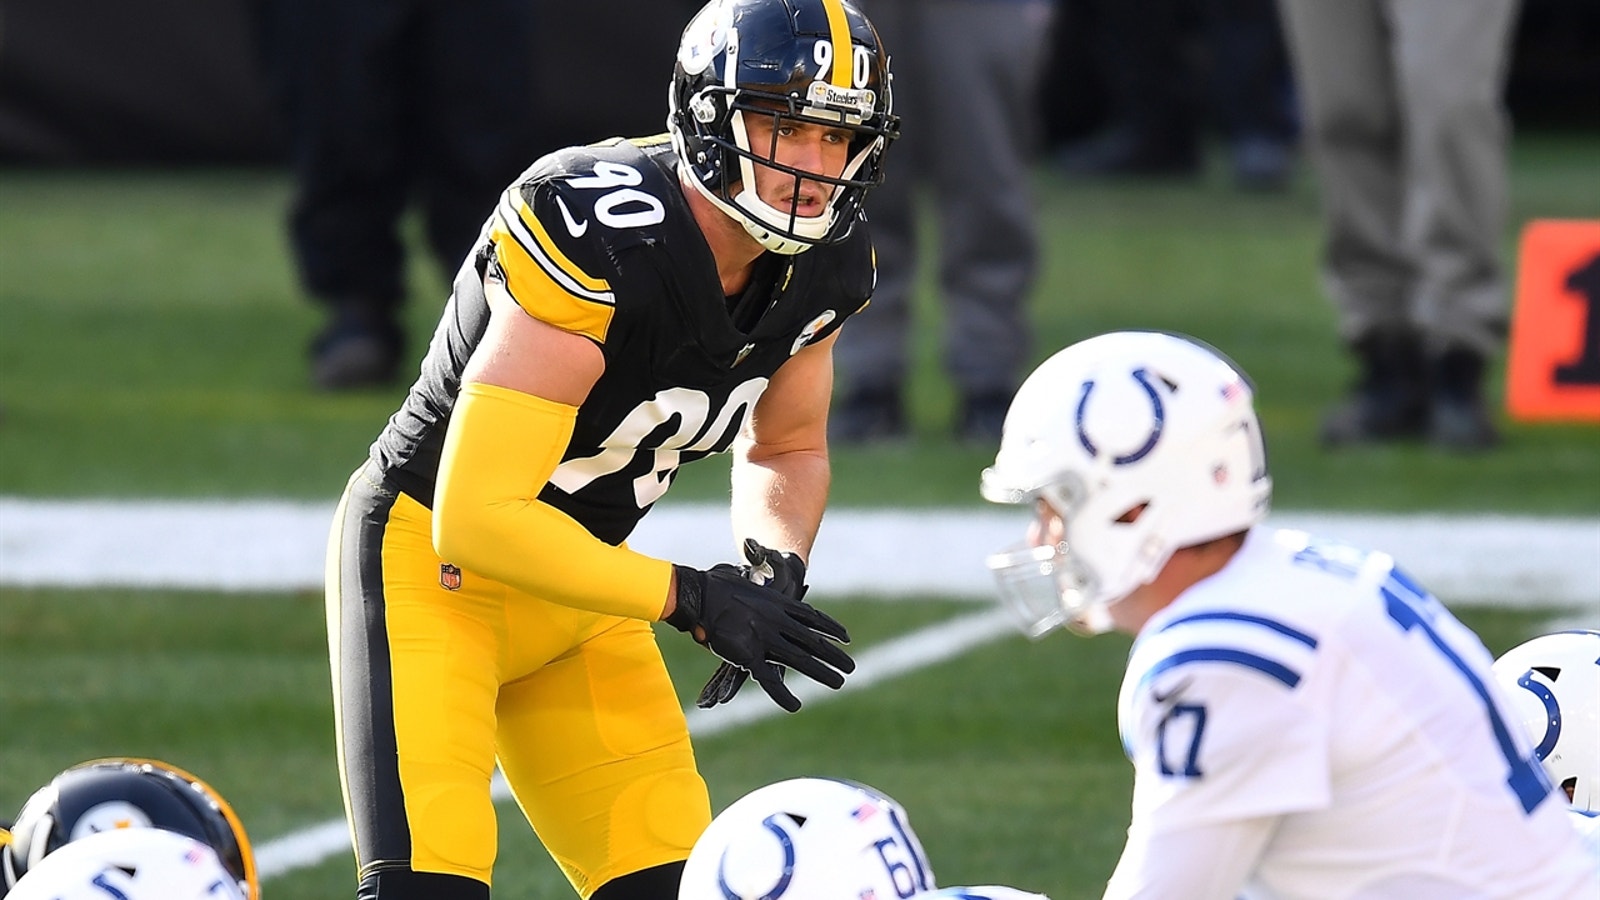 2020 NFL on Fox Awards: T.J. Watt named Defensive Player of the Year